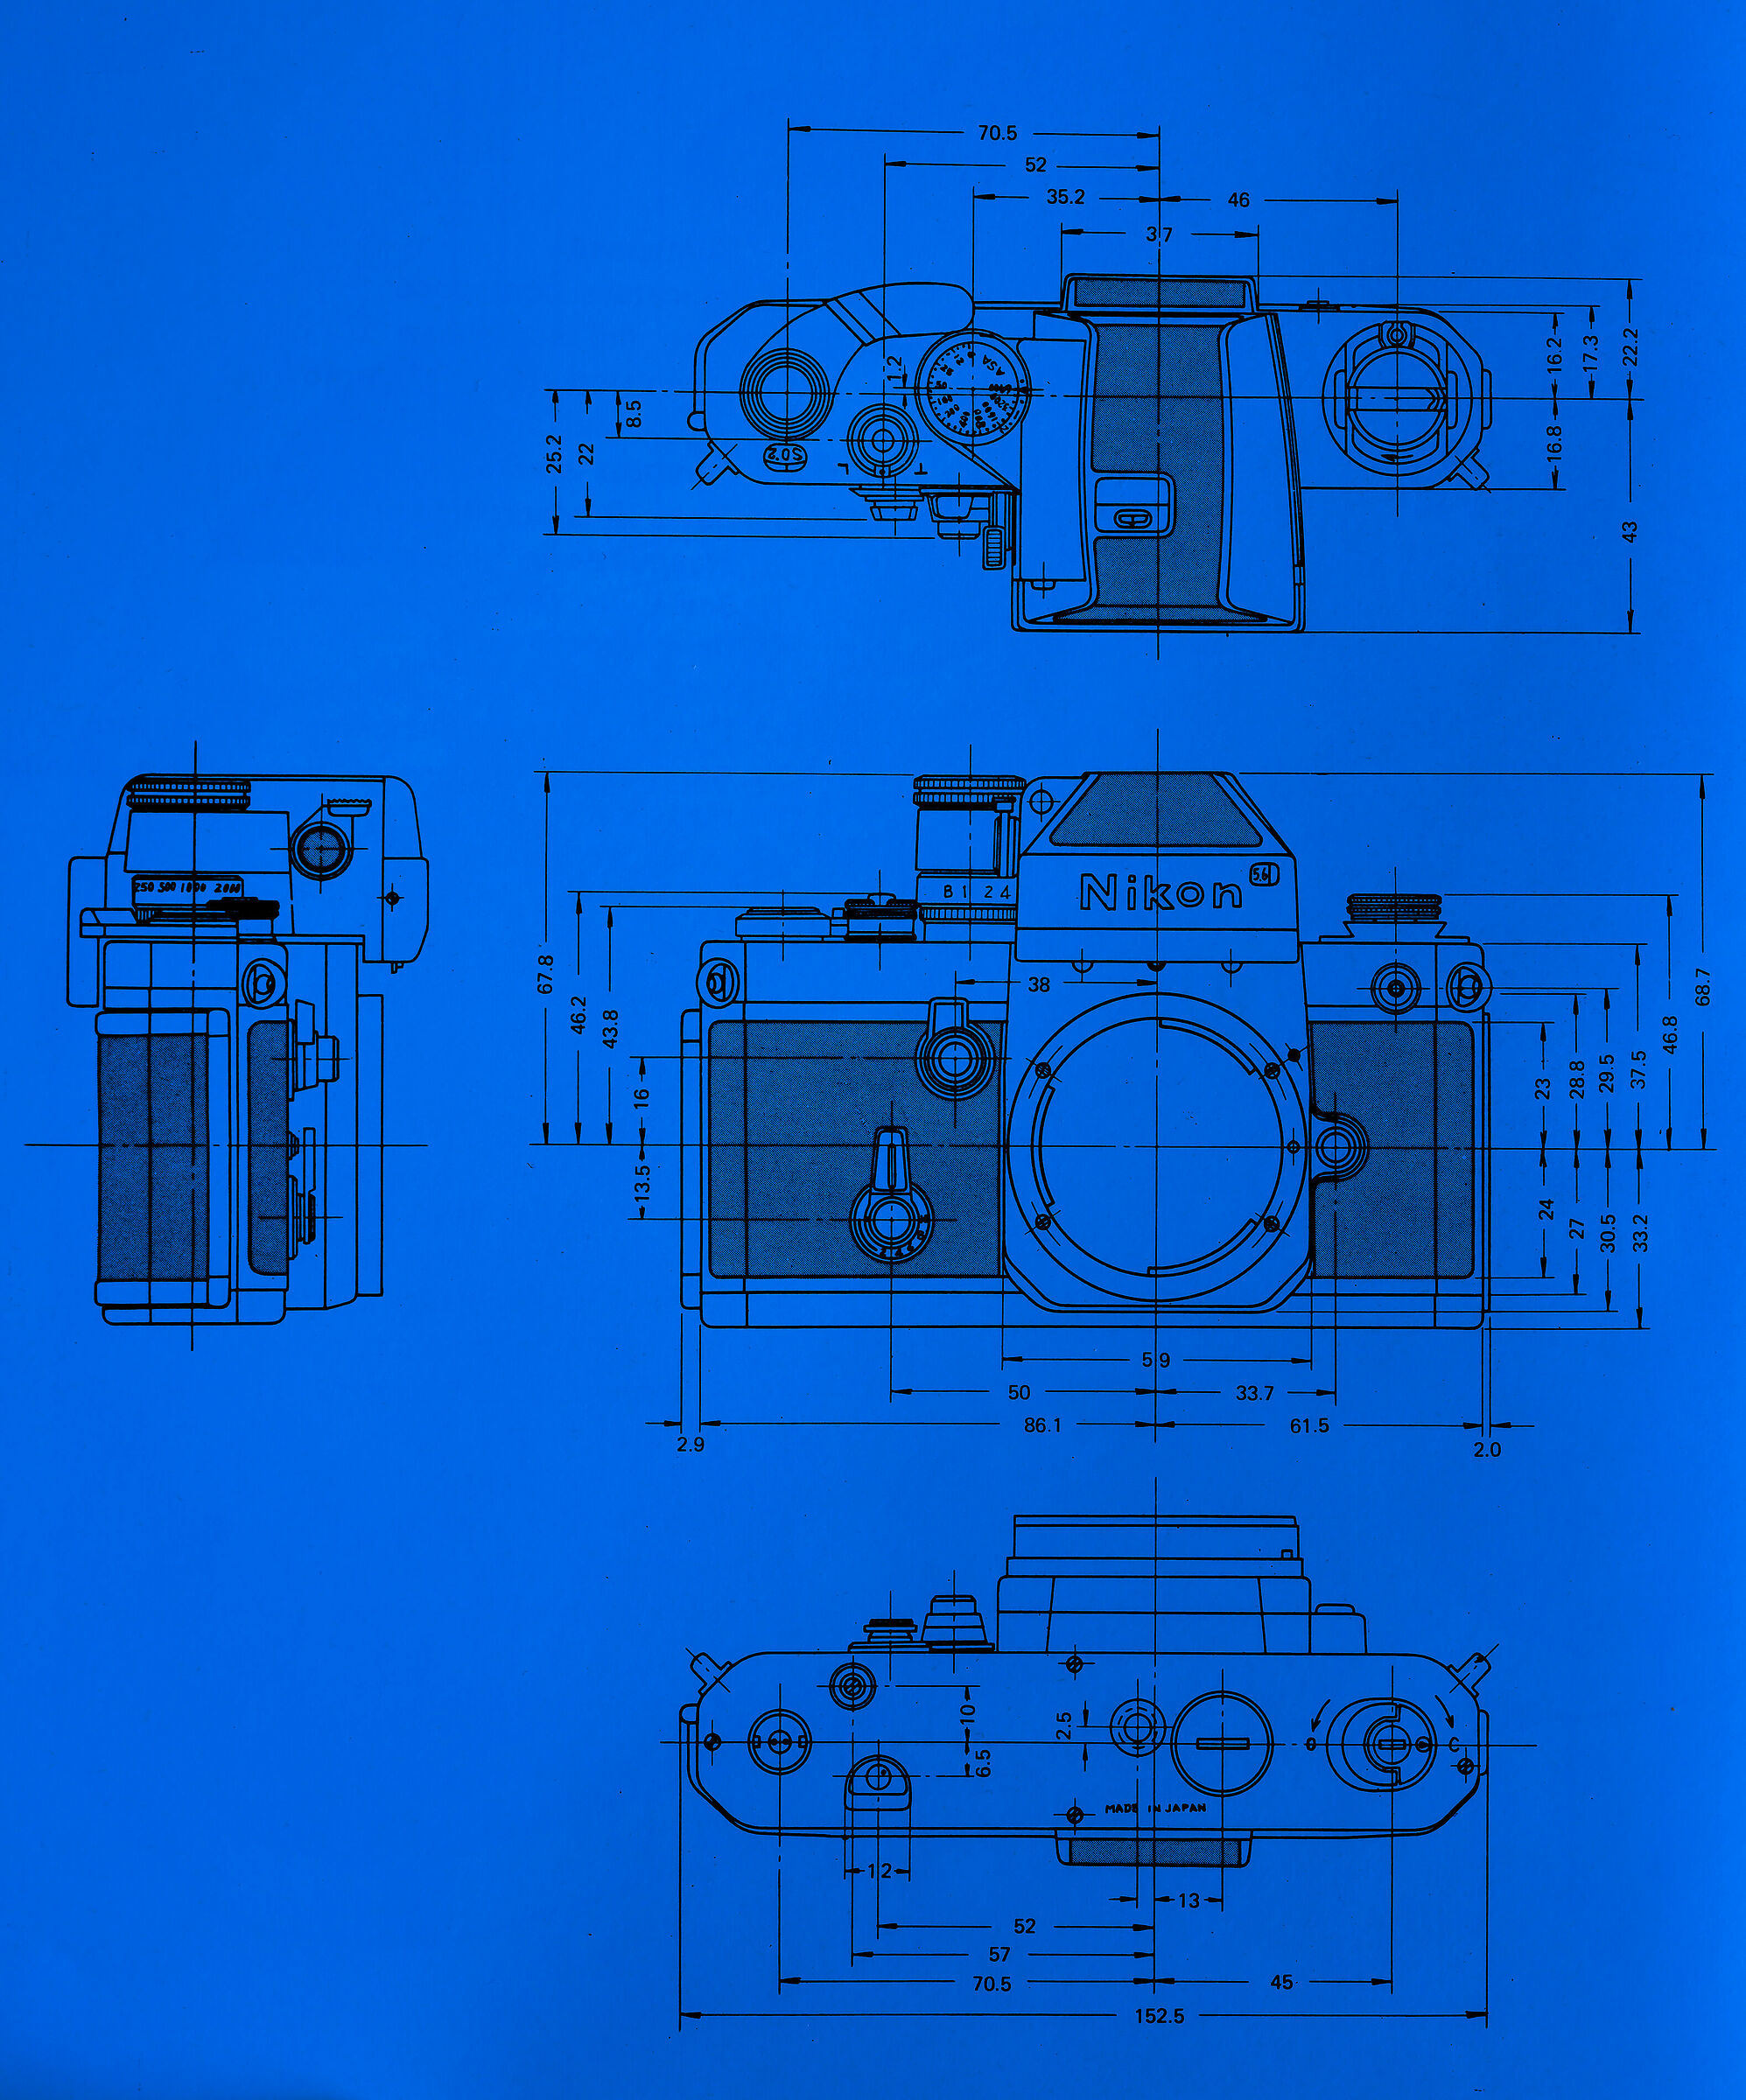 Drawings of the "F2" with pentaprisma Photomic...